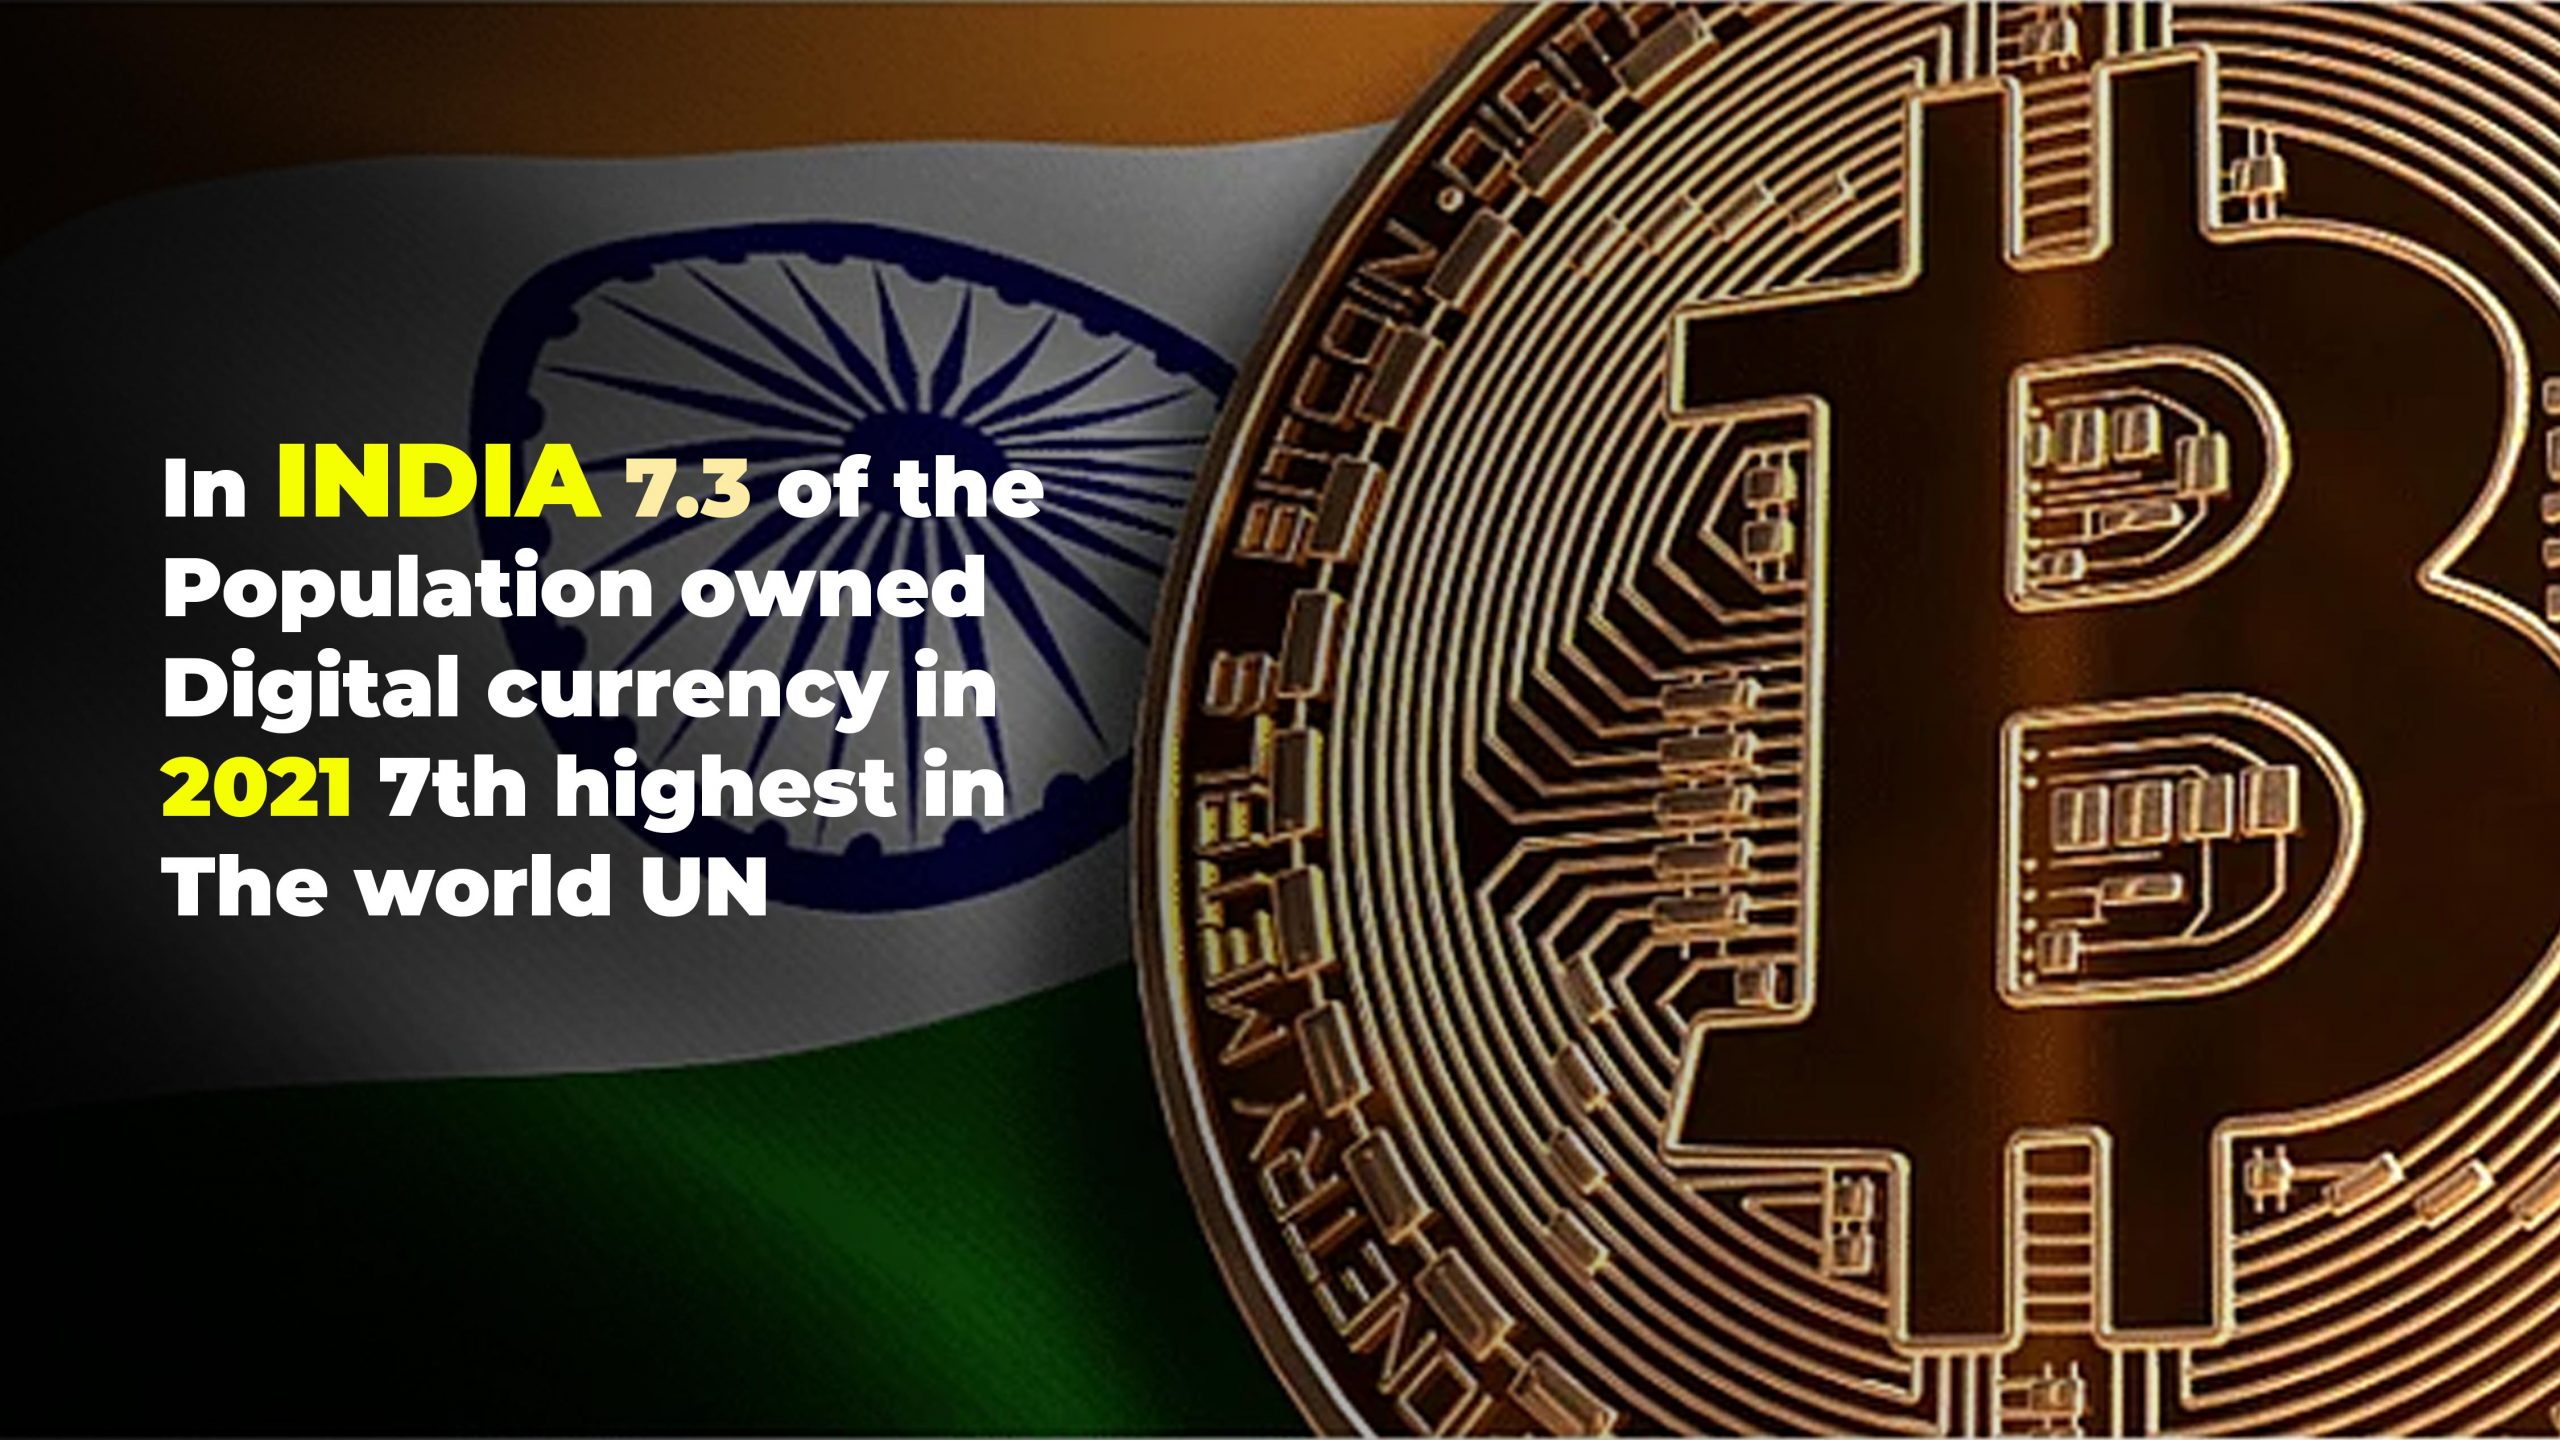 In India 7.3 of the population owned digital currency in 2021 7th highest in the world UN